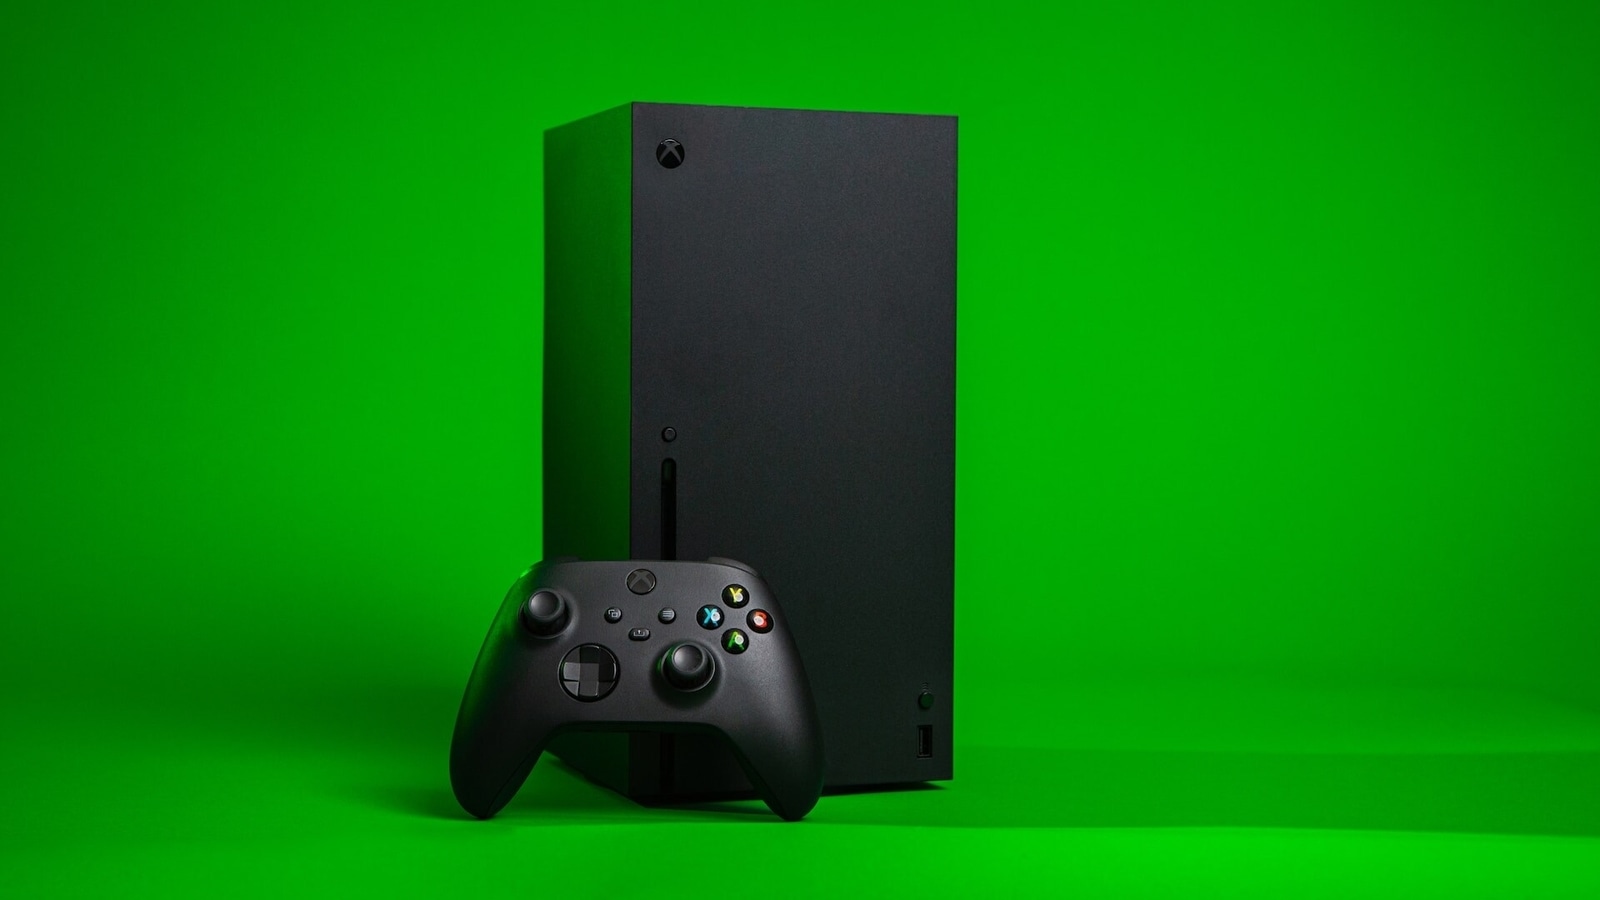 Xbox Series X And Game Pass Are Raising Prices To Match PS5